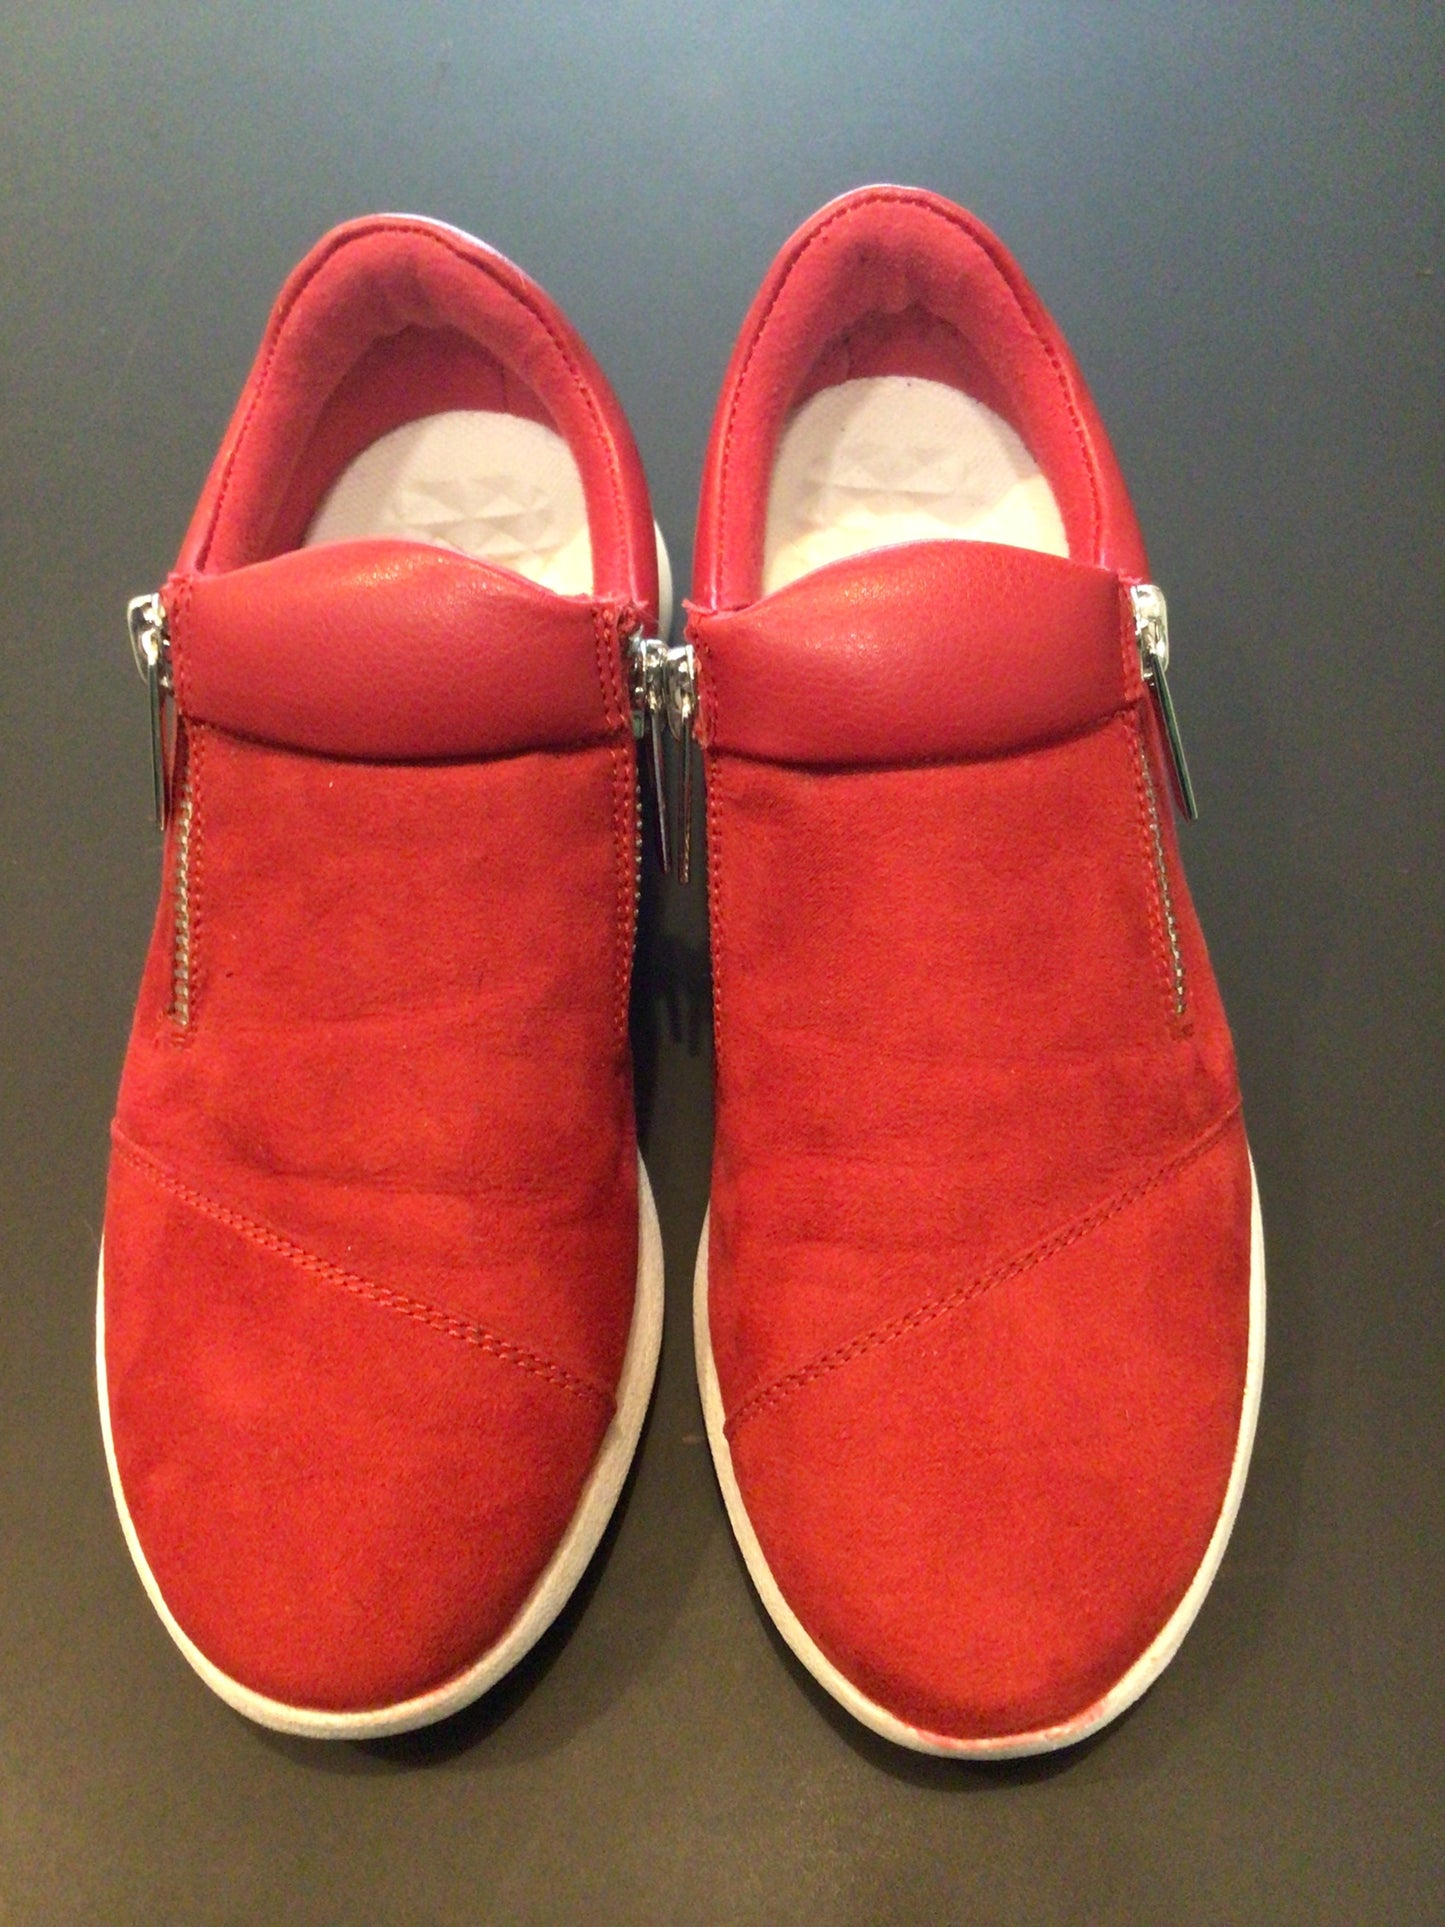 Consignment 2206-12 Aldo red casual shoes. Size 37.